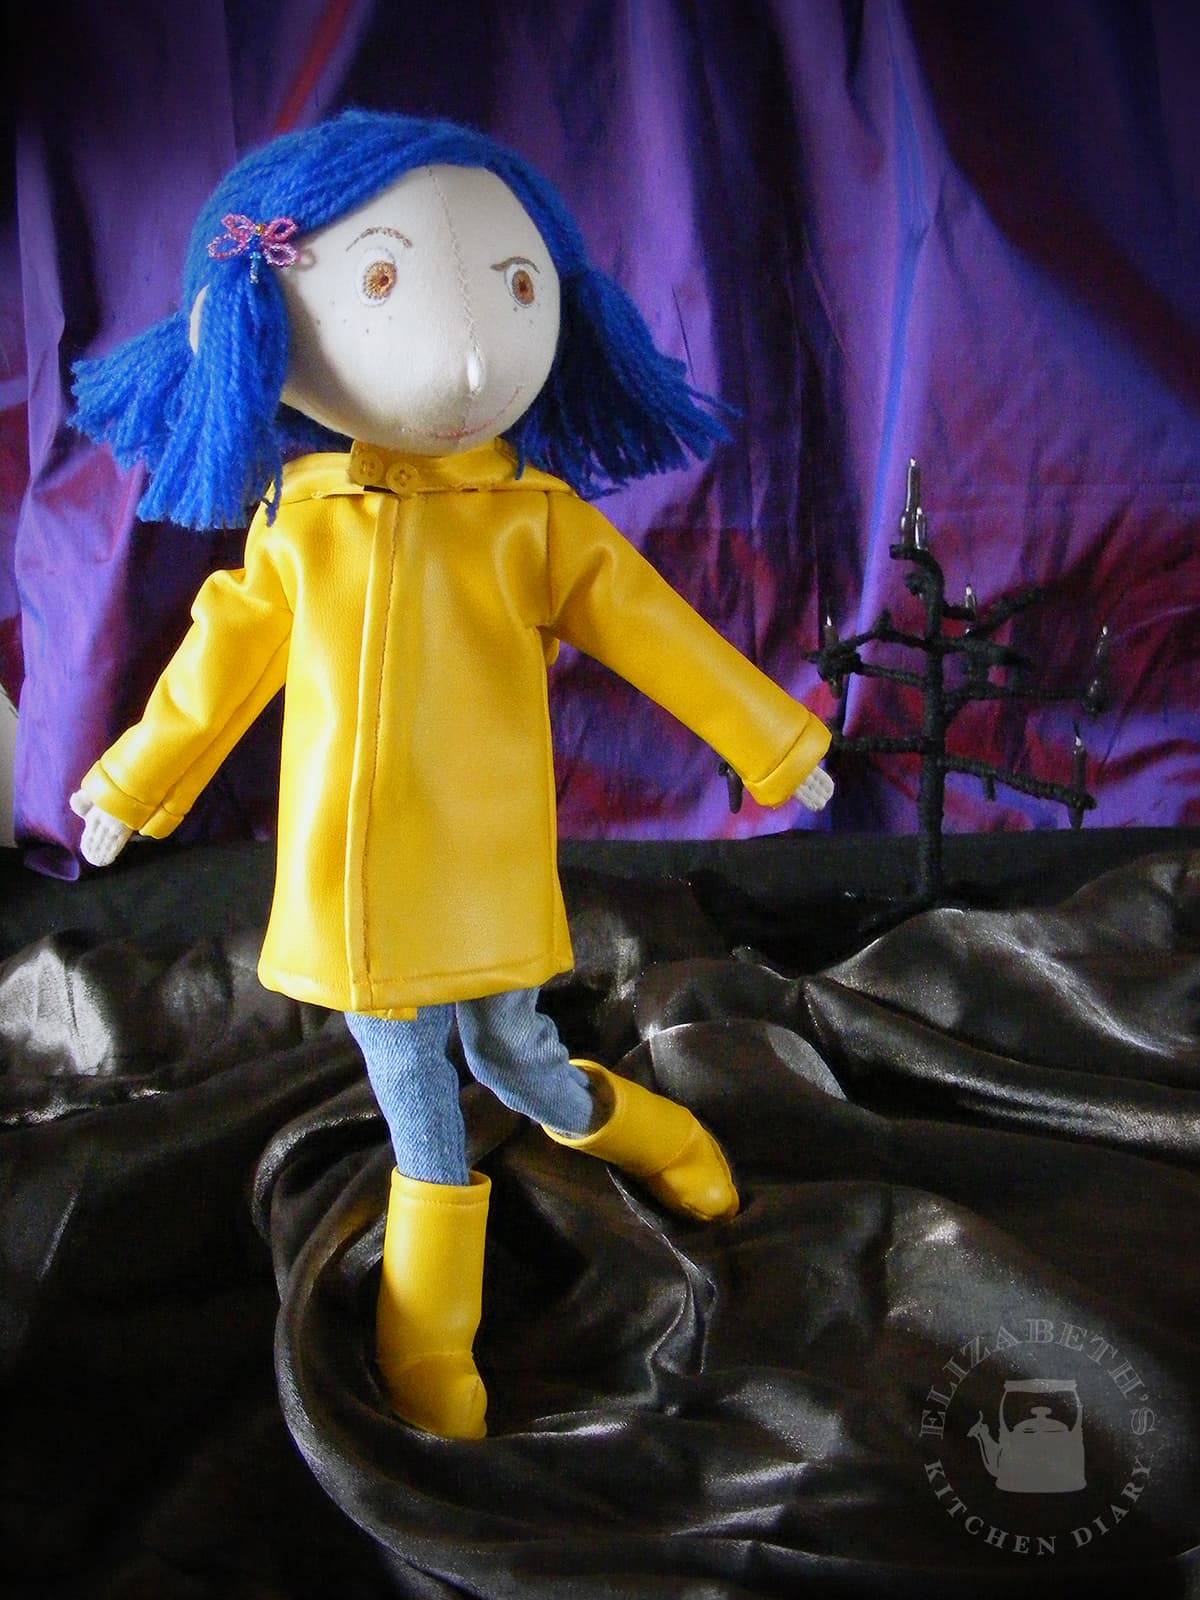 Photograph of the finished Coraline doll with yellow raincoat and boots standing up with swirled black and purple fabric around her.